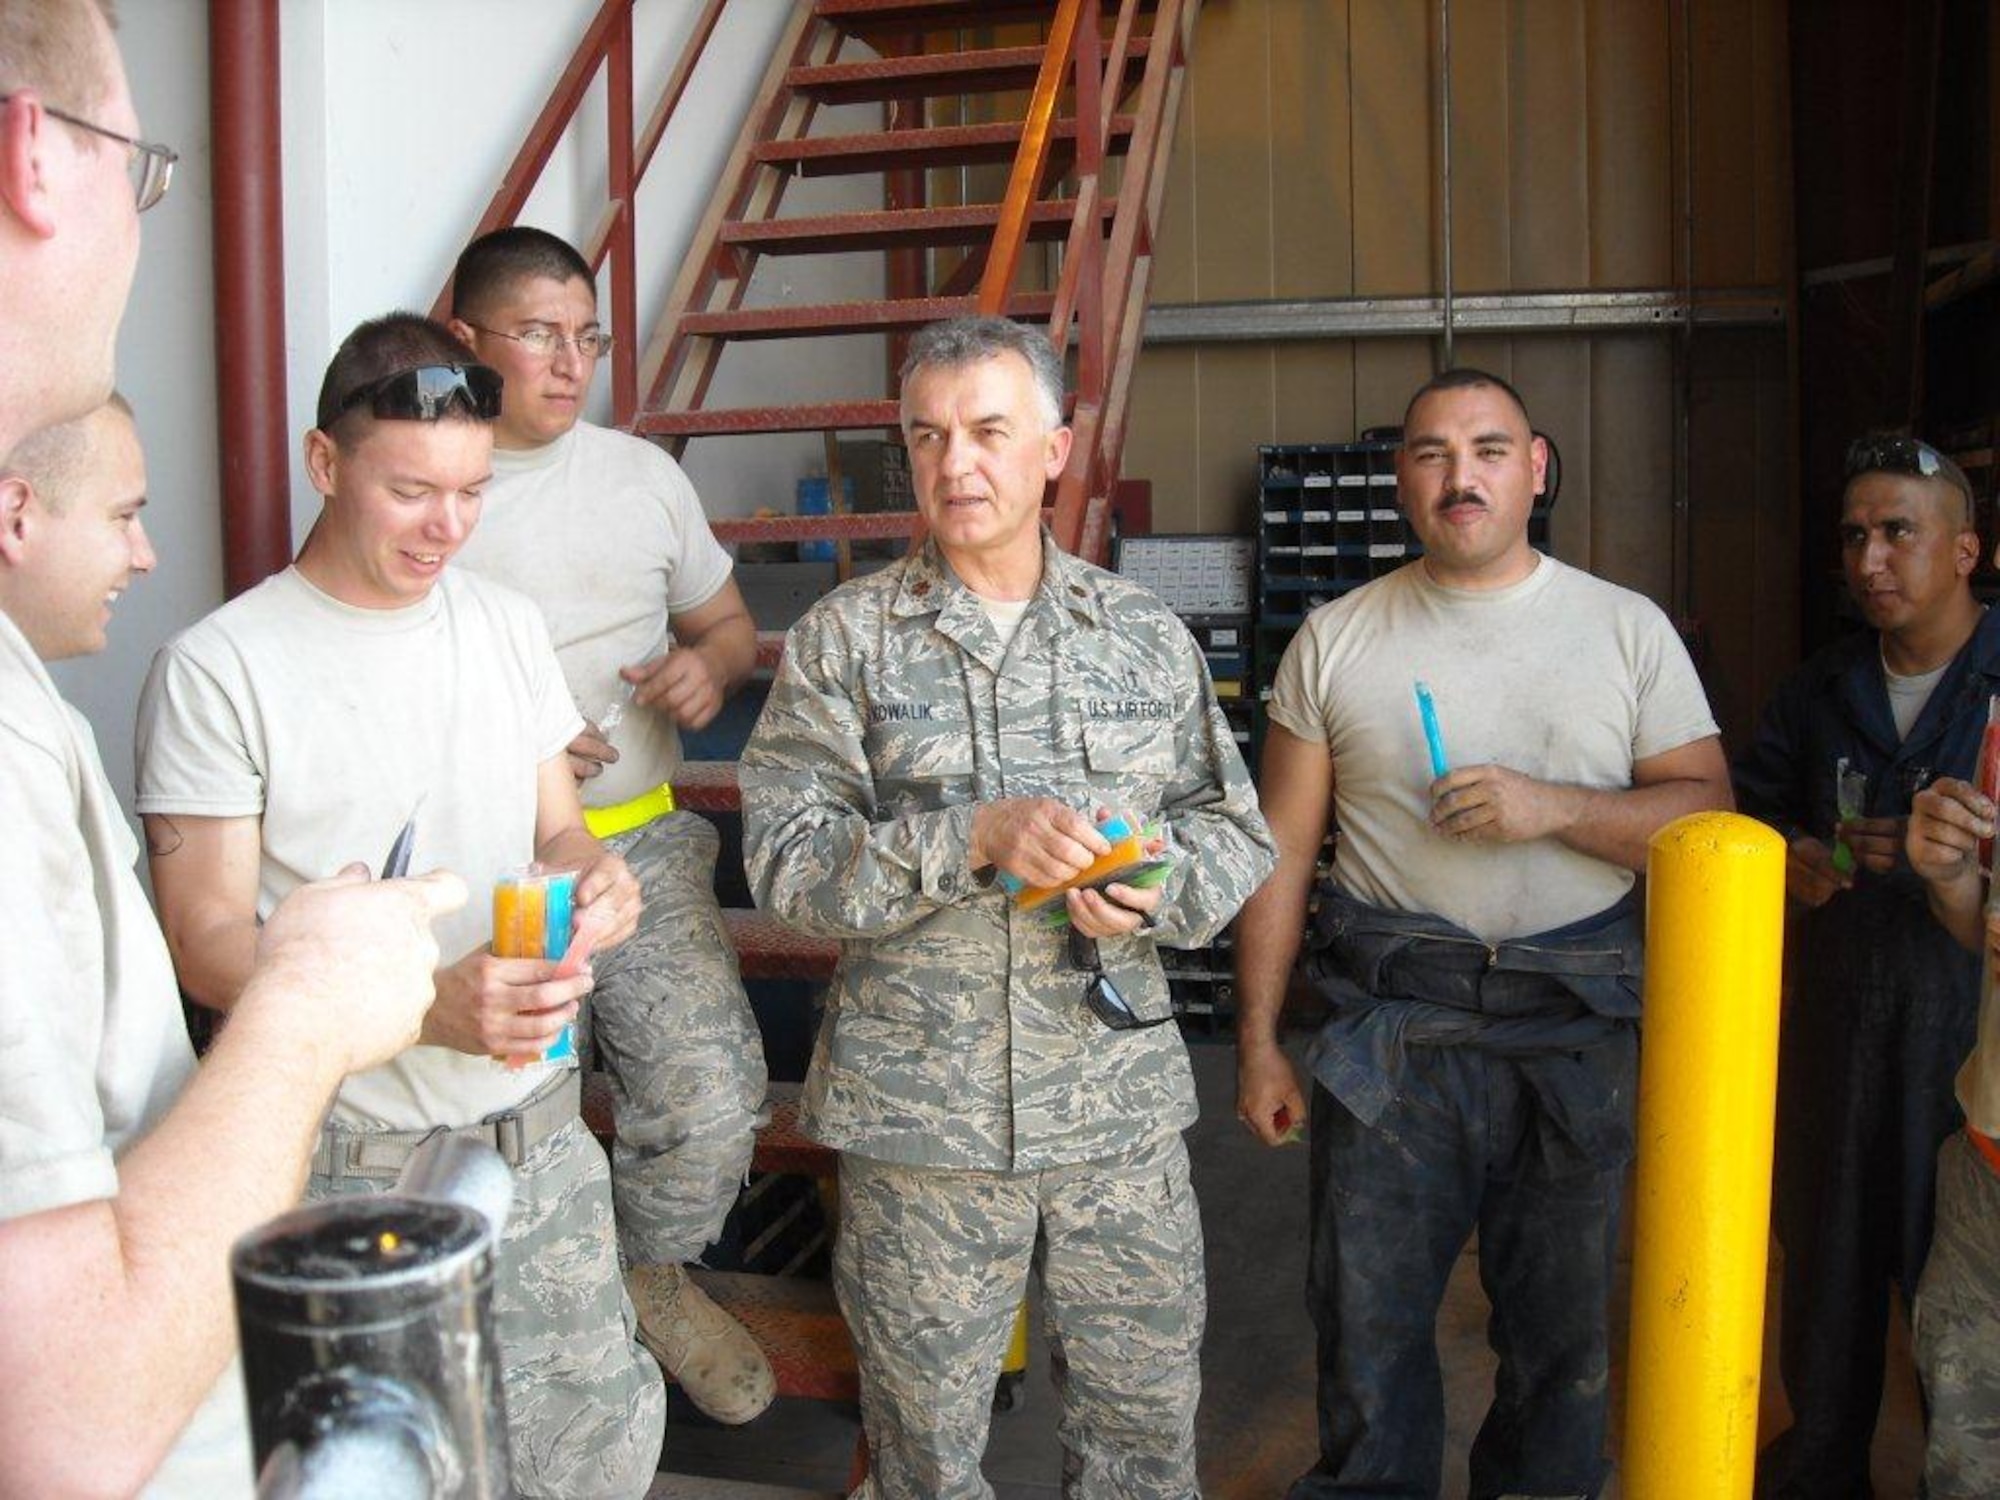 Chaplain (Maj.) Jacek Kowalik, 332nd Air Expeditionary Wing Catholic priest, visits with Airmen assigned to the 332nd AEW Oct. 17, 2011 at Joint Base Balad, Iraq. Kowalik is a native of Parszow, Poland and is deployed from Spangdahlem Air Base, Germany. (U.S. Air Force photo by Tech. Sgt. Jonathan Meier)